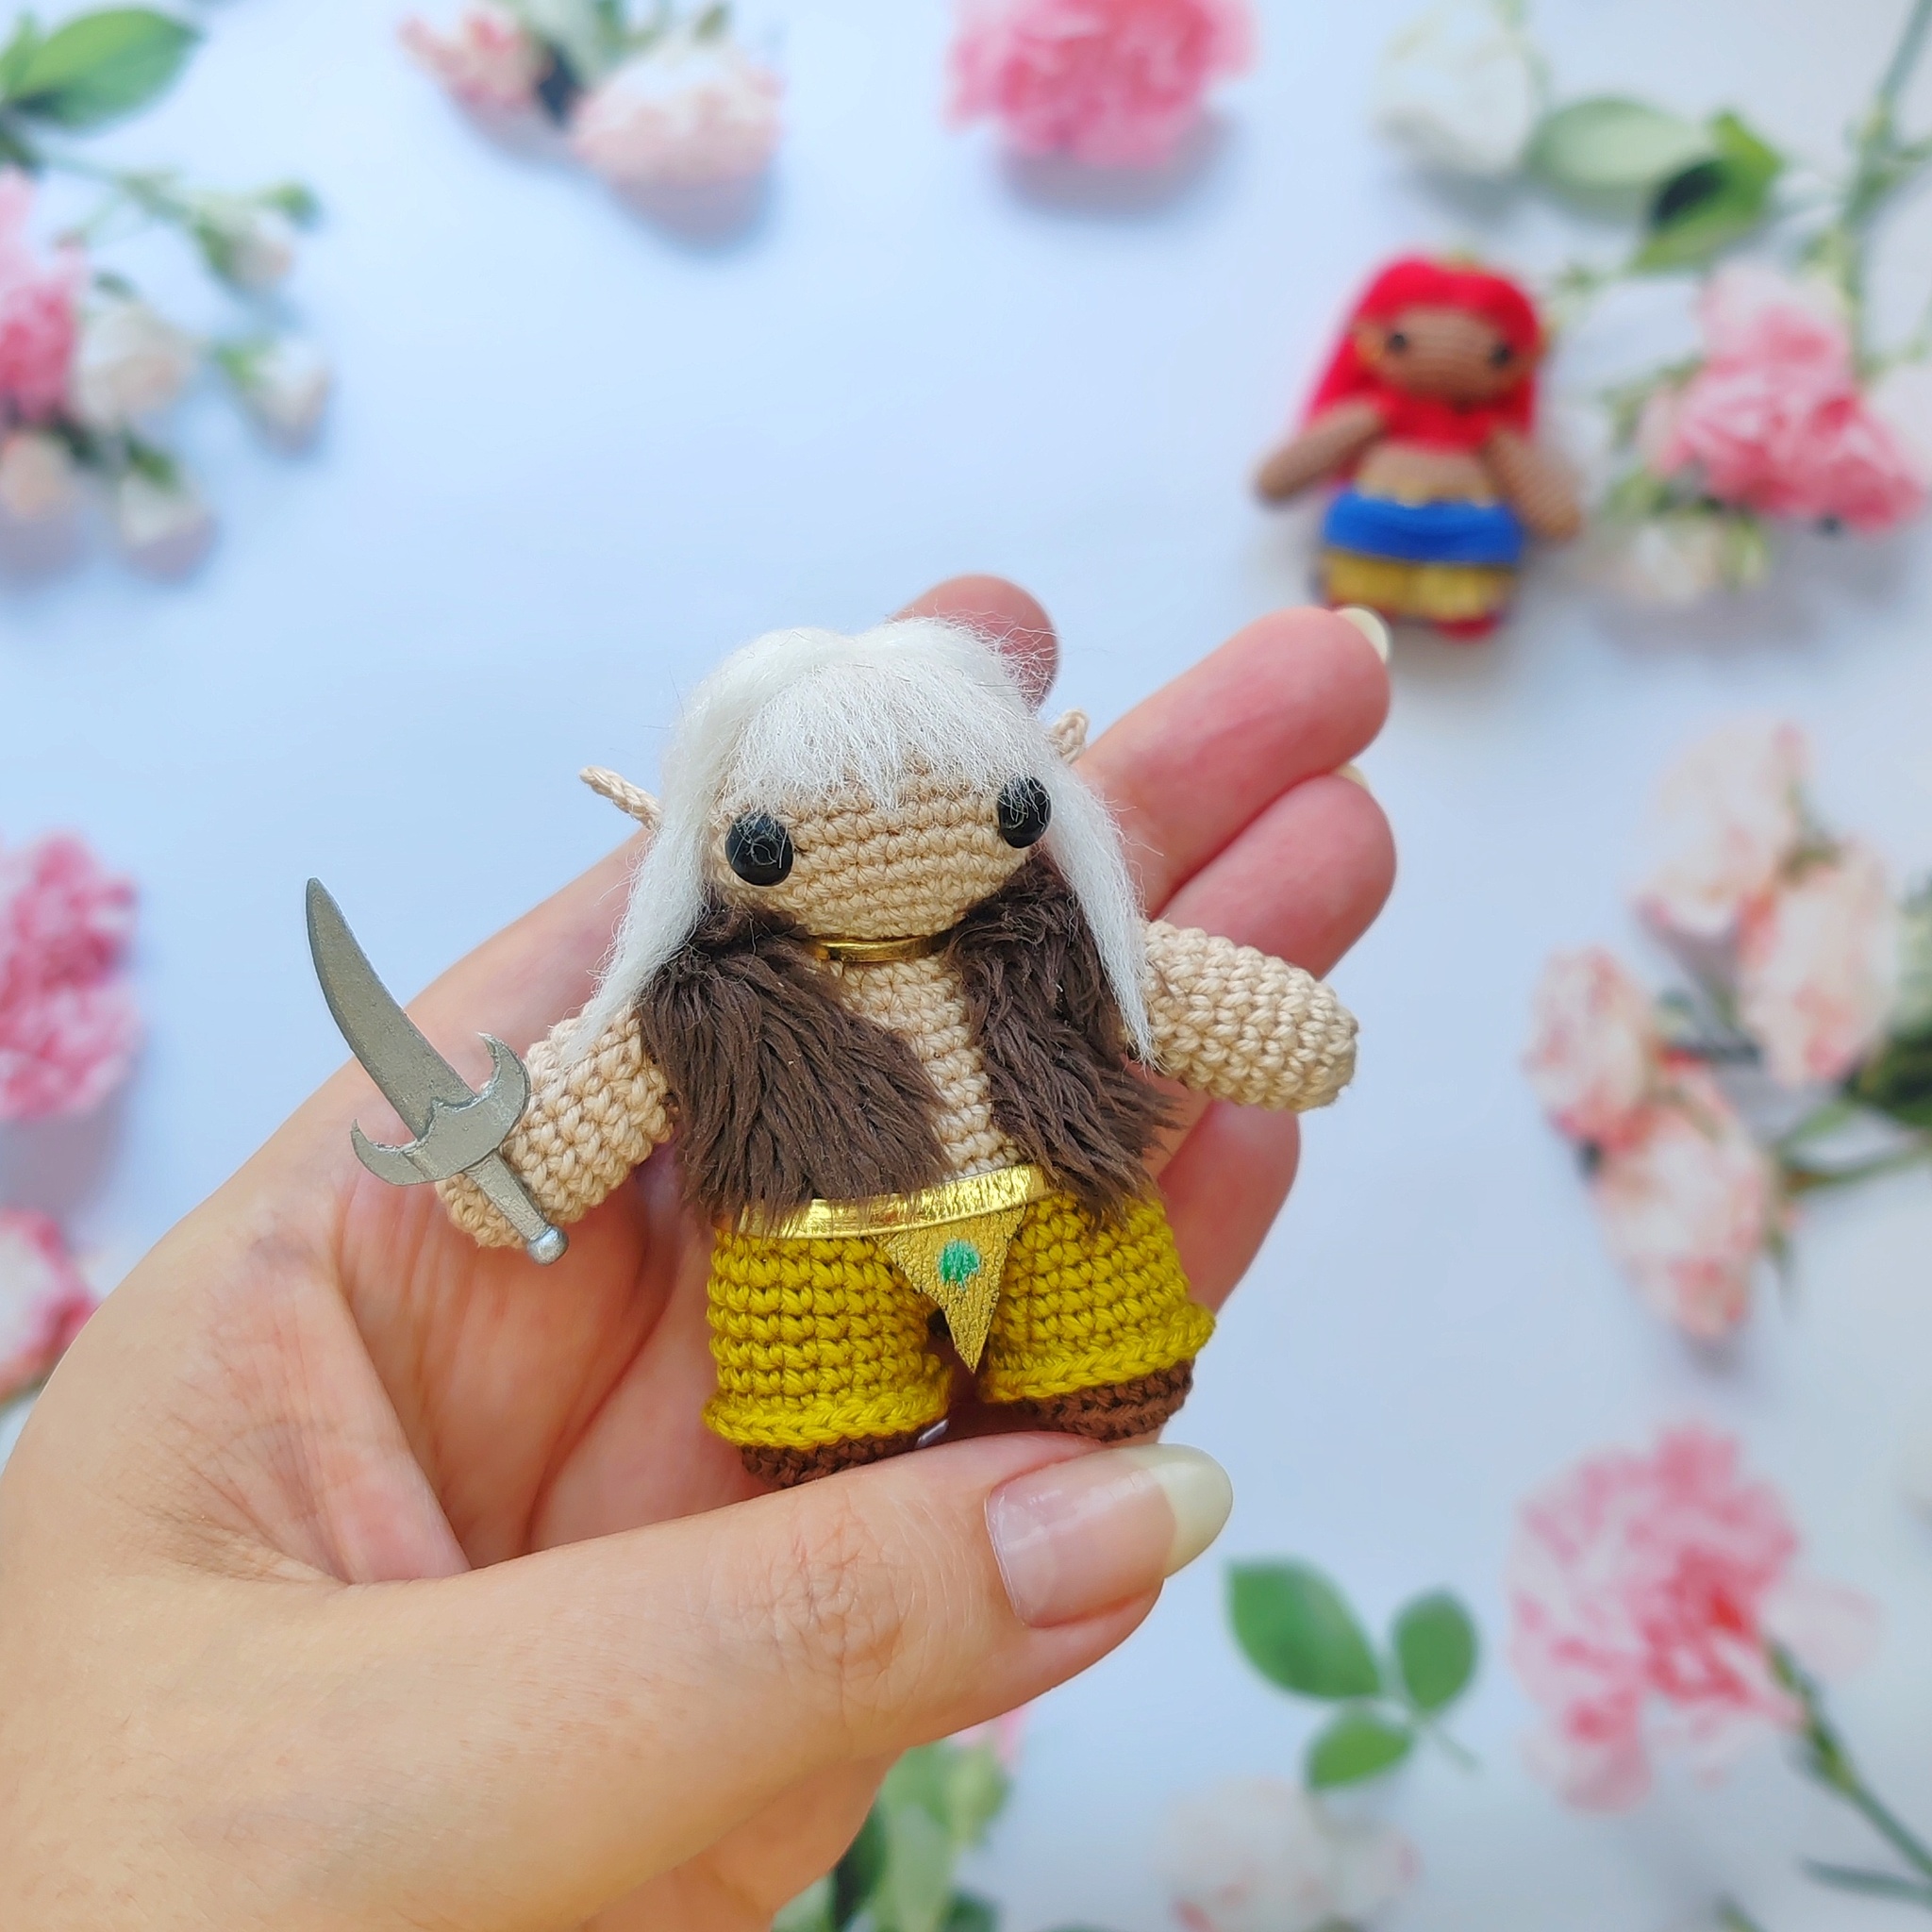 ElfQuest. Saga of the Forest Riders - My, Author's toy, Crochet, Amigurumi, Knitted toys, Elfquest, Elves, Fantasy, Comics, Needlework without process, Friday tag is mine, Longpost